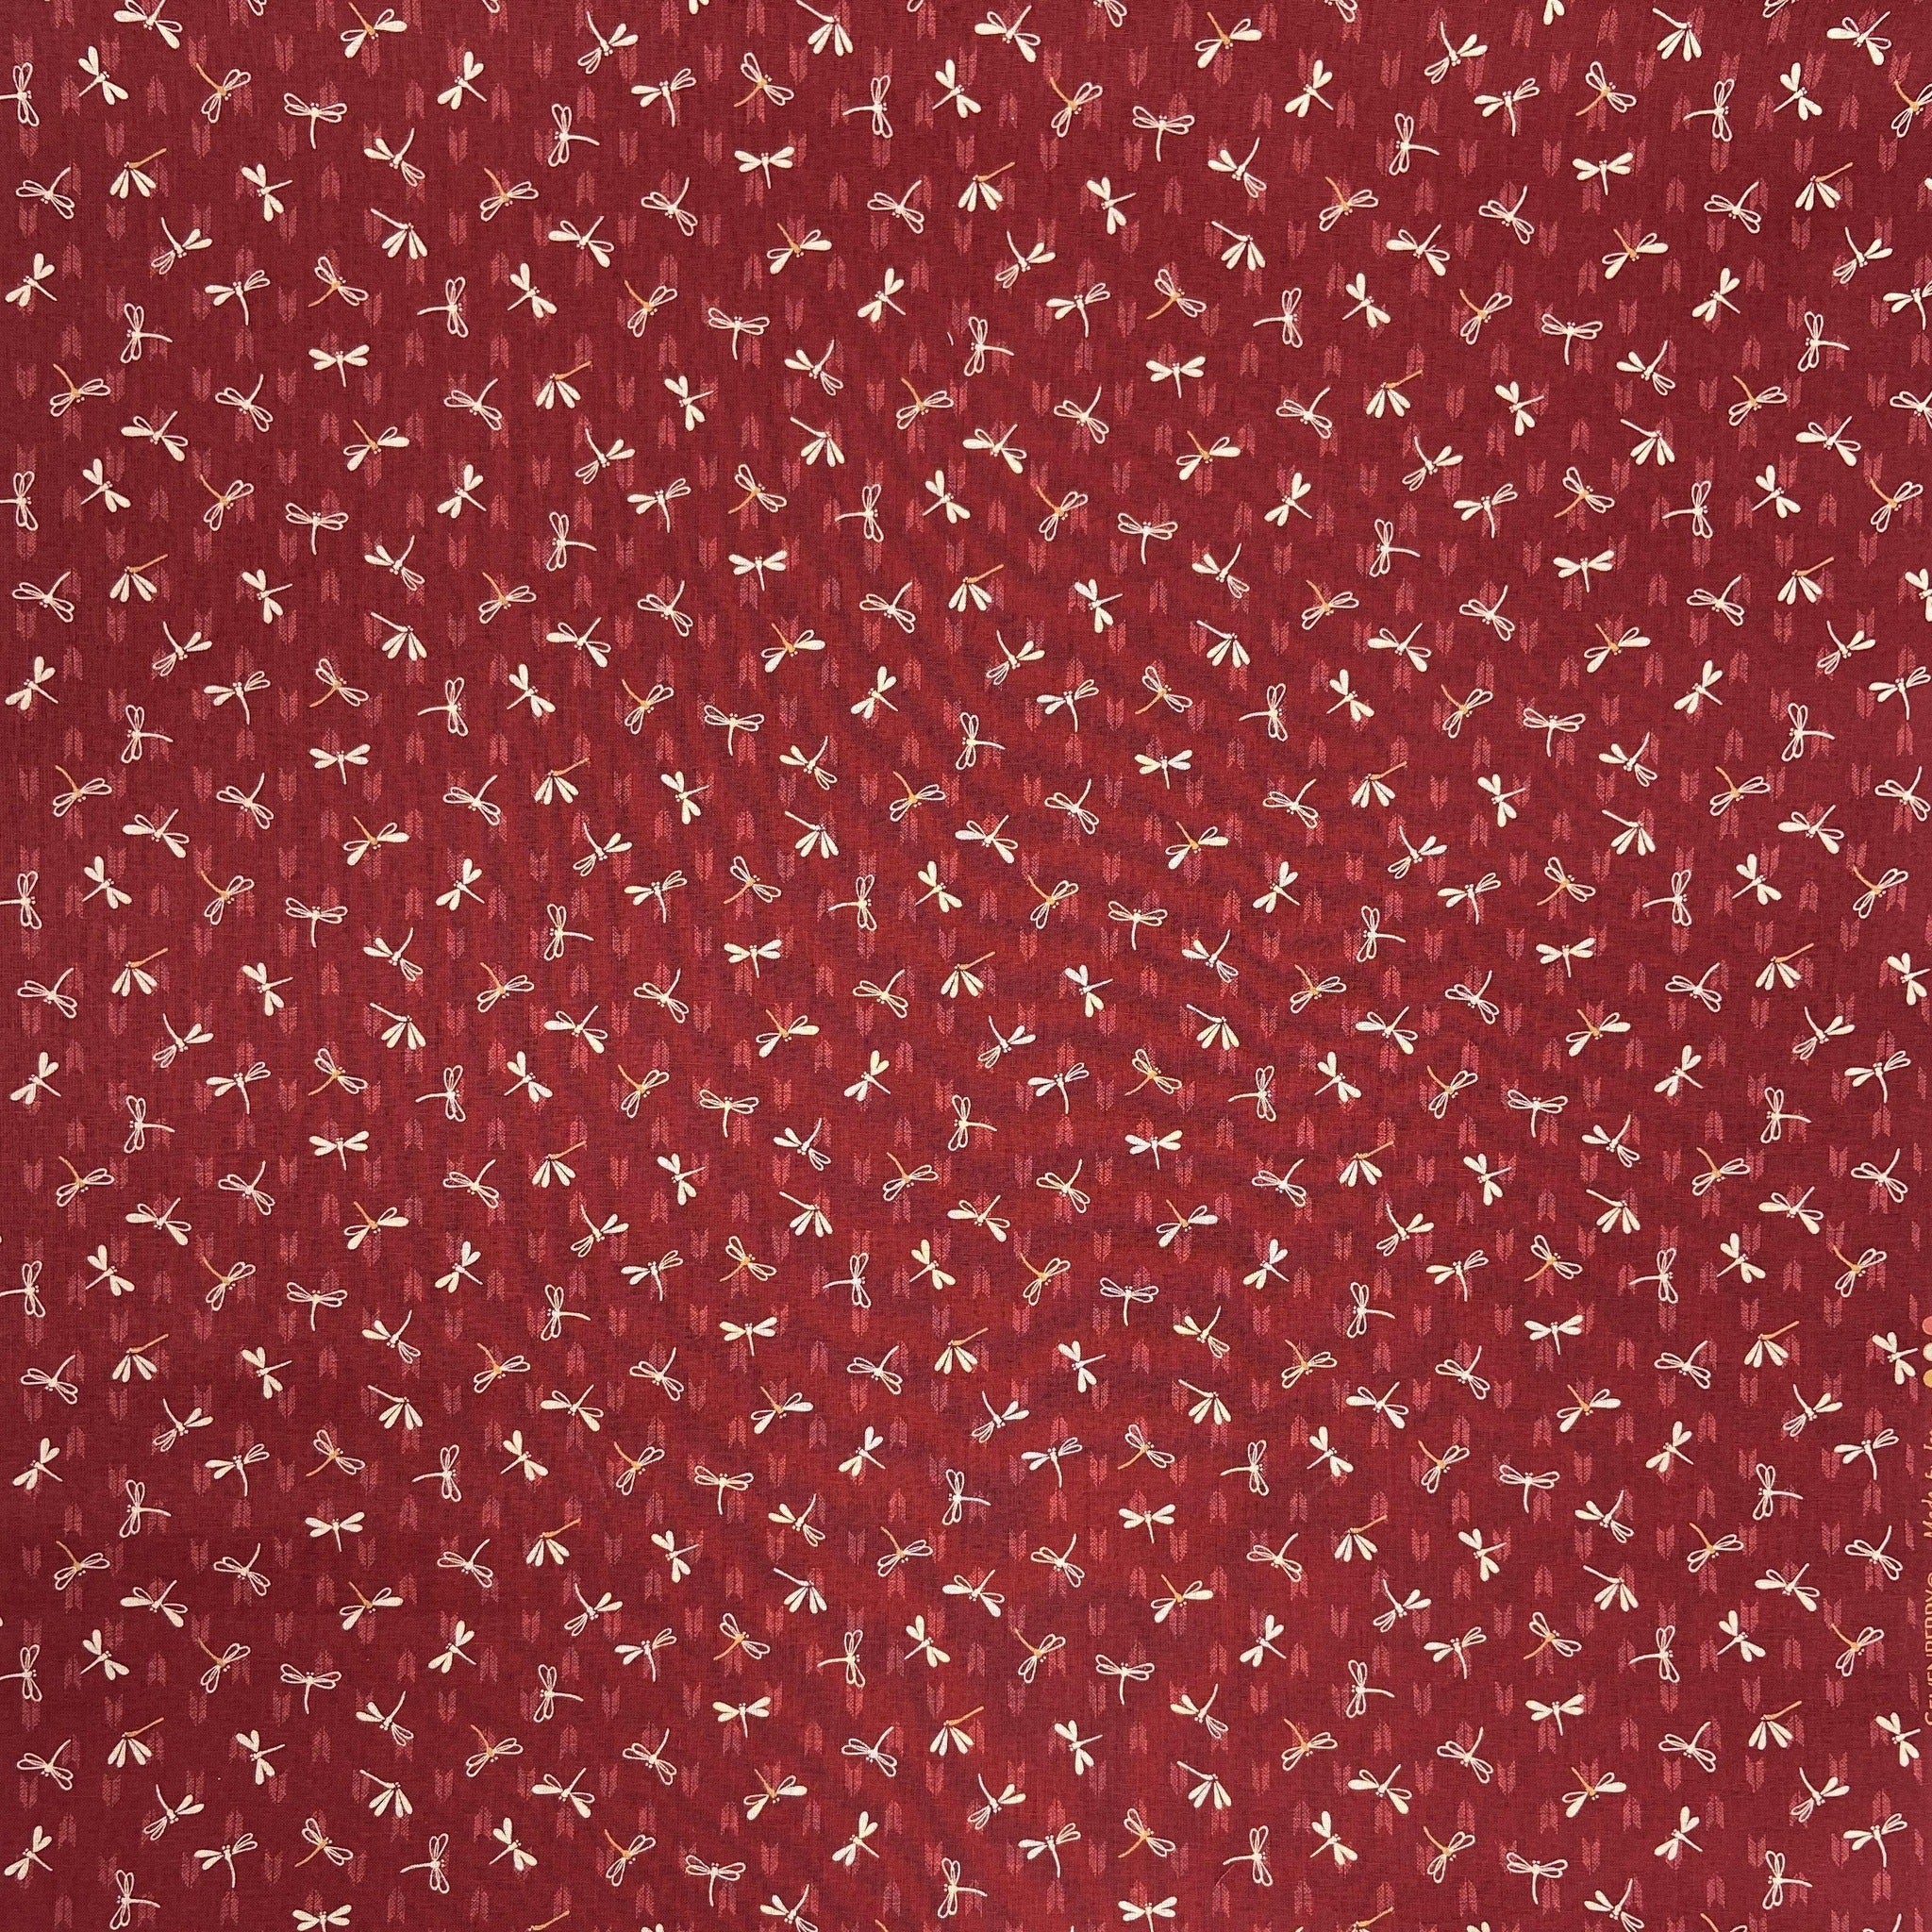 Japanese Cotton Sheeting Print - Dragonflies with Arrows Red - Earth Indigo